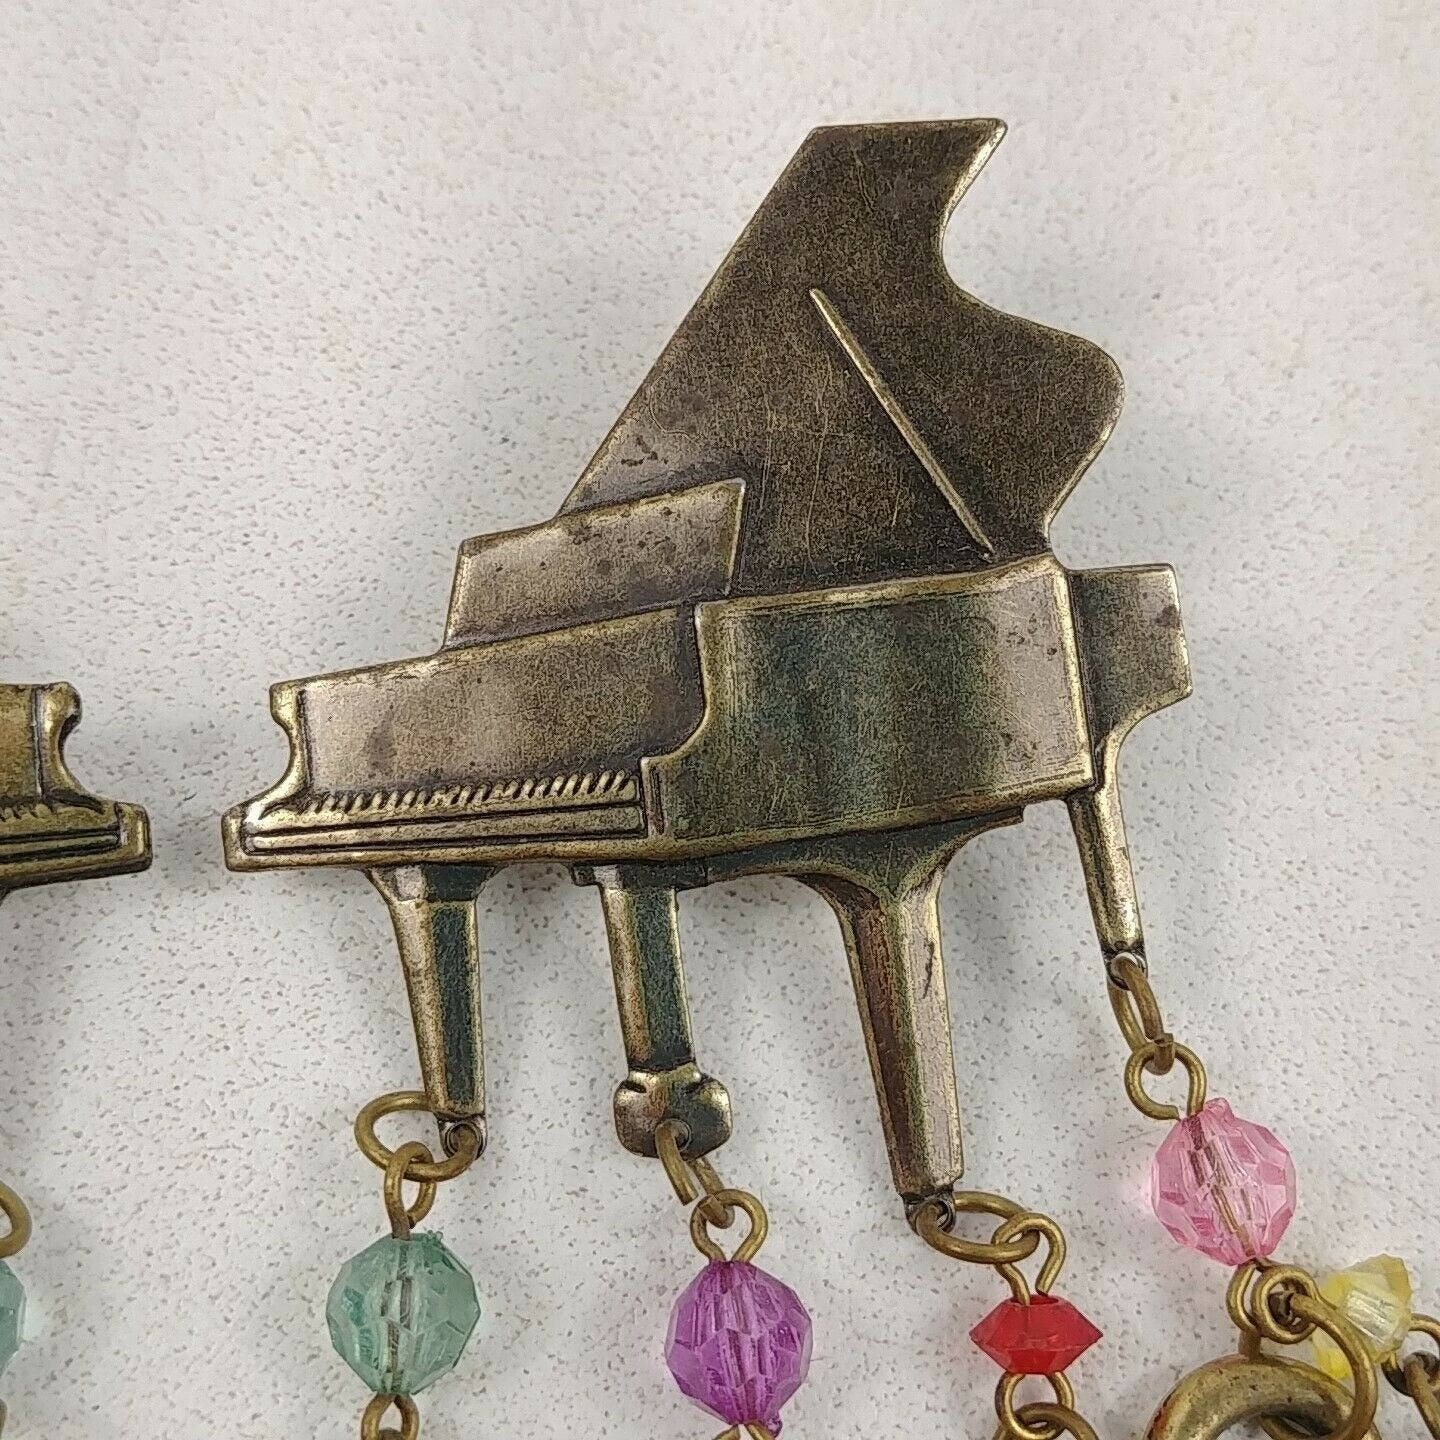 Music Grand Piano Earrings Vintage Colorful Pierced Dangle Guitar Horn Accordion